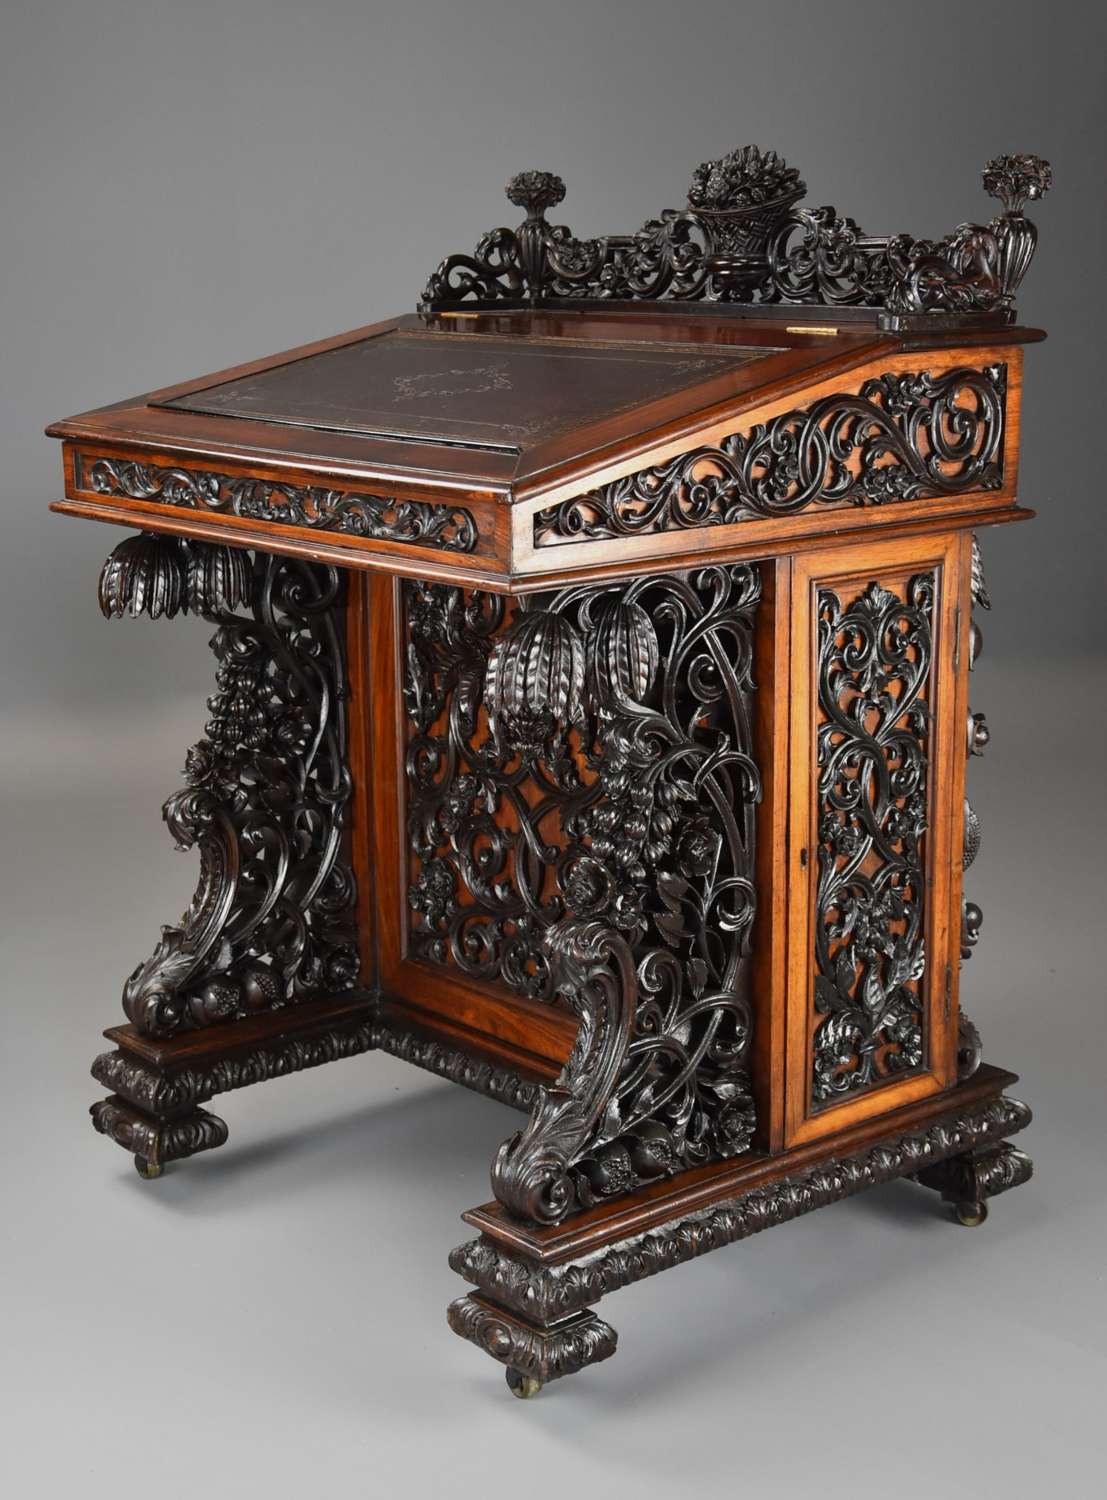 Exquisite 19thc Anglo Indian padouk & satinwood carved davenport